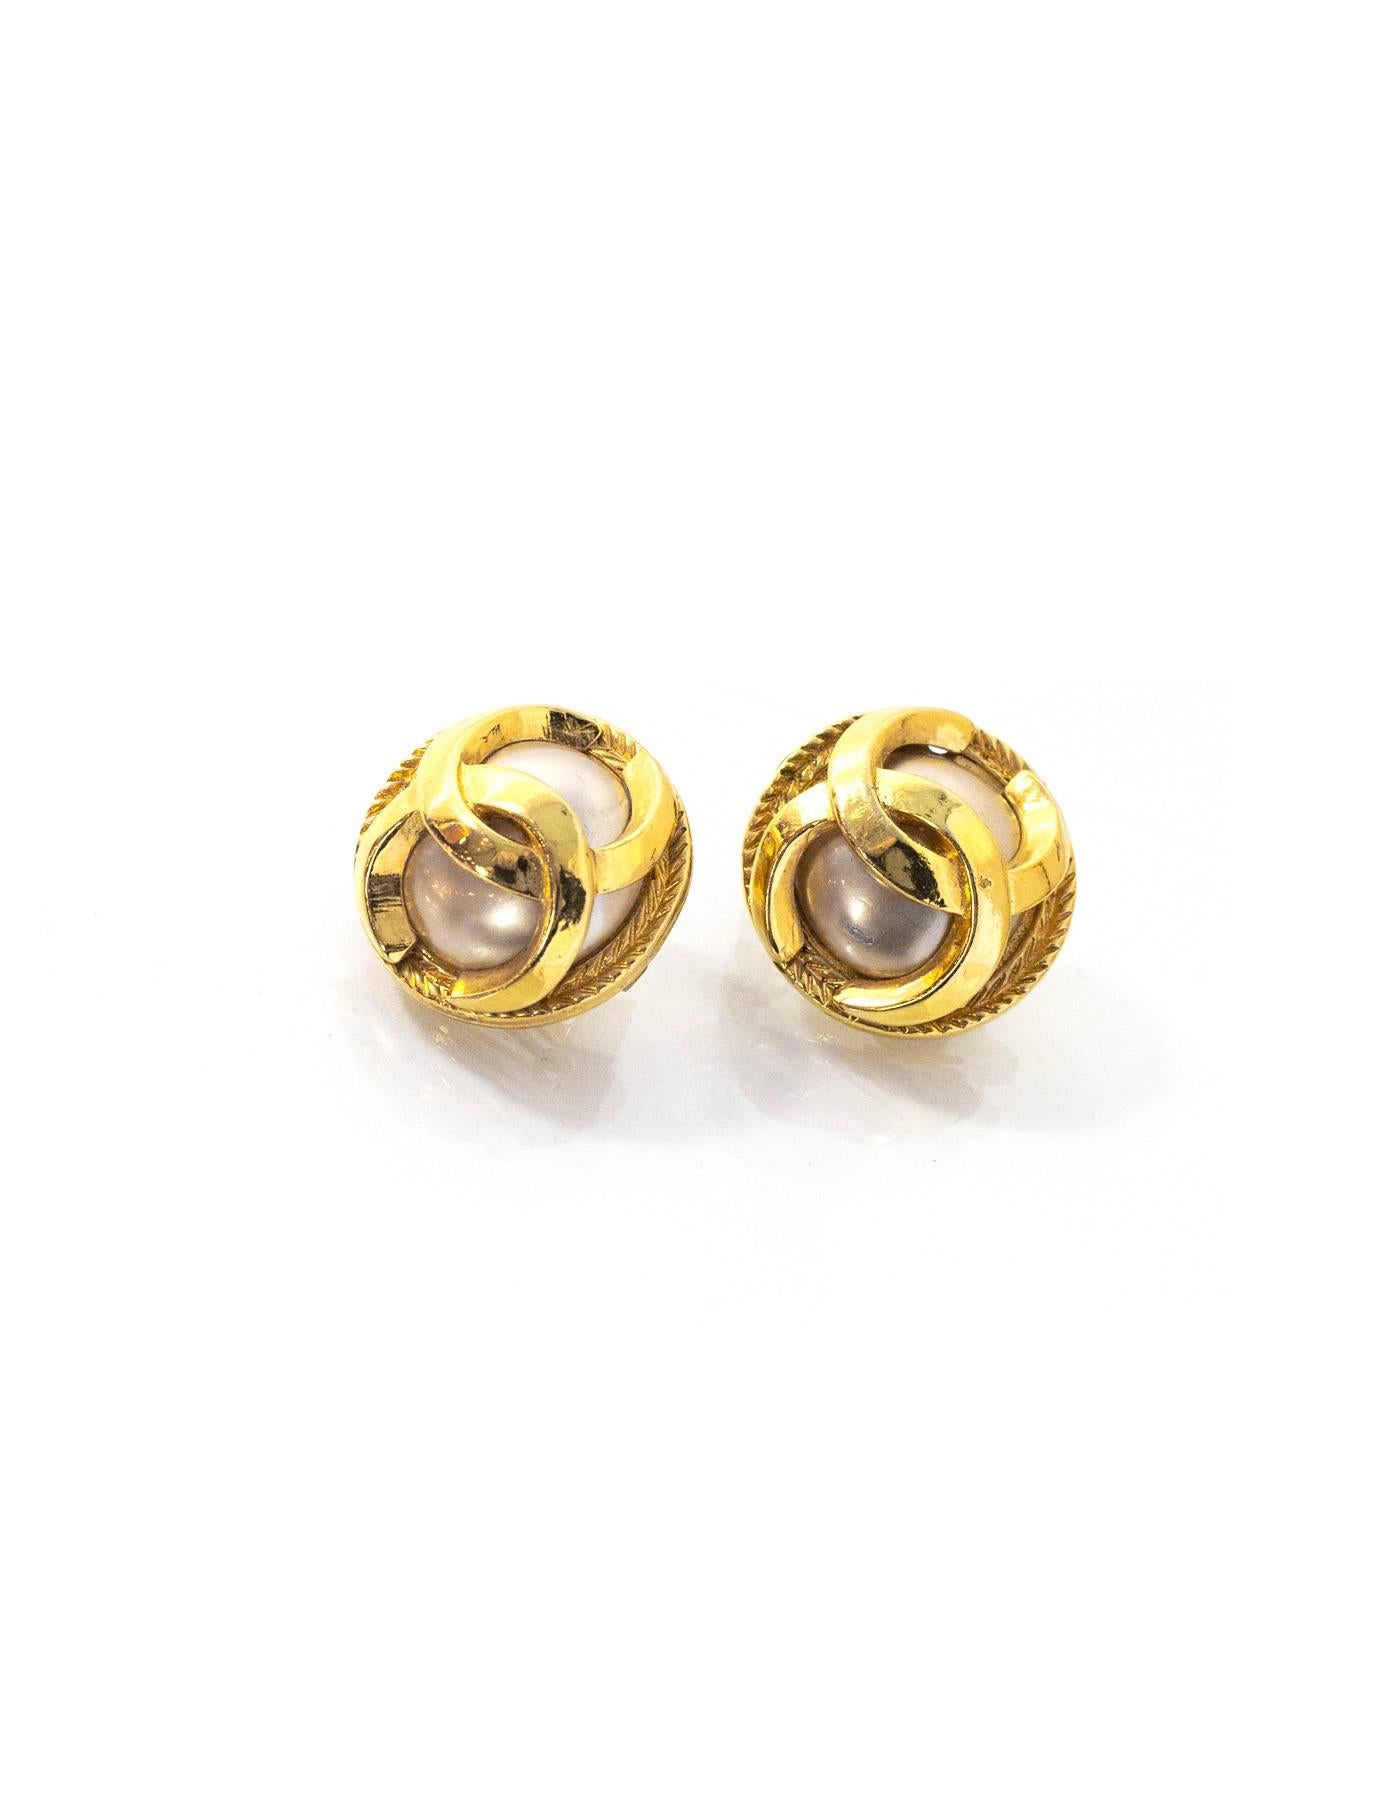 Chanel Goldtone & Pearl CC Clip On Earrings 

Made In: France
Color: Goldtone and ivory
Materials: Faux pearl and metal
Closure: Clip on
Stamp: Chanel CC Made in France 
Overall Condition: Excellent vintage, pre-owned condition with the